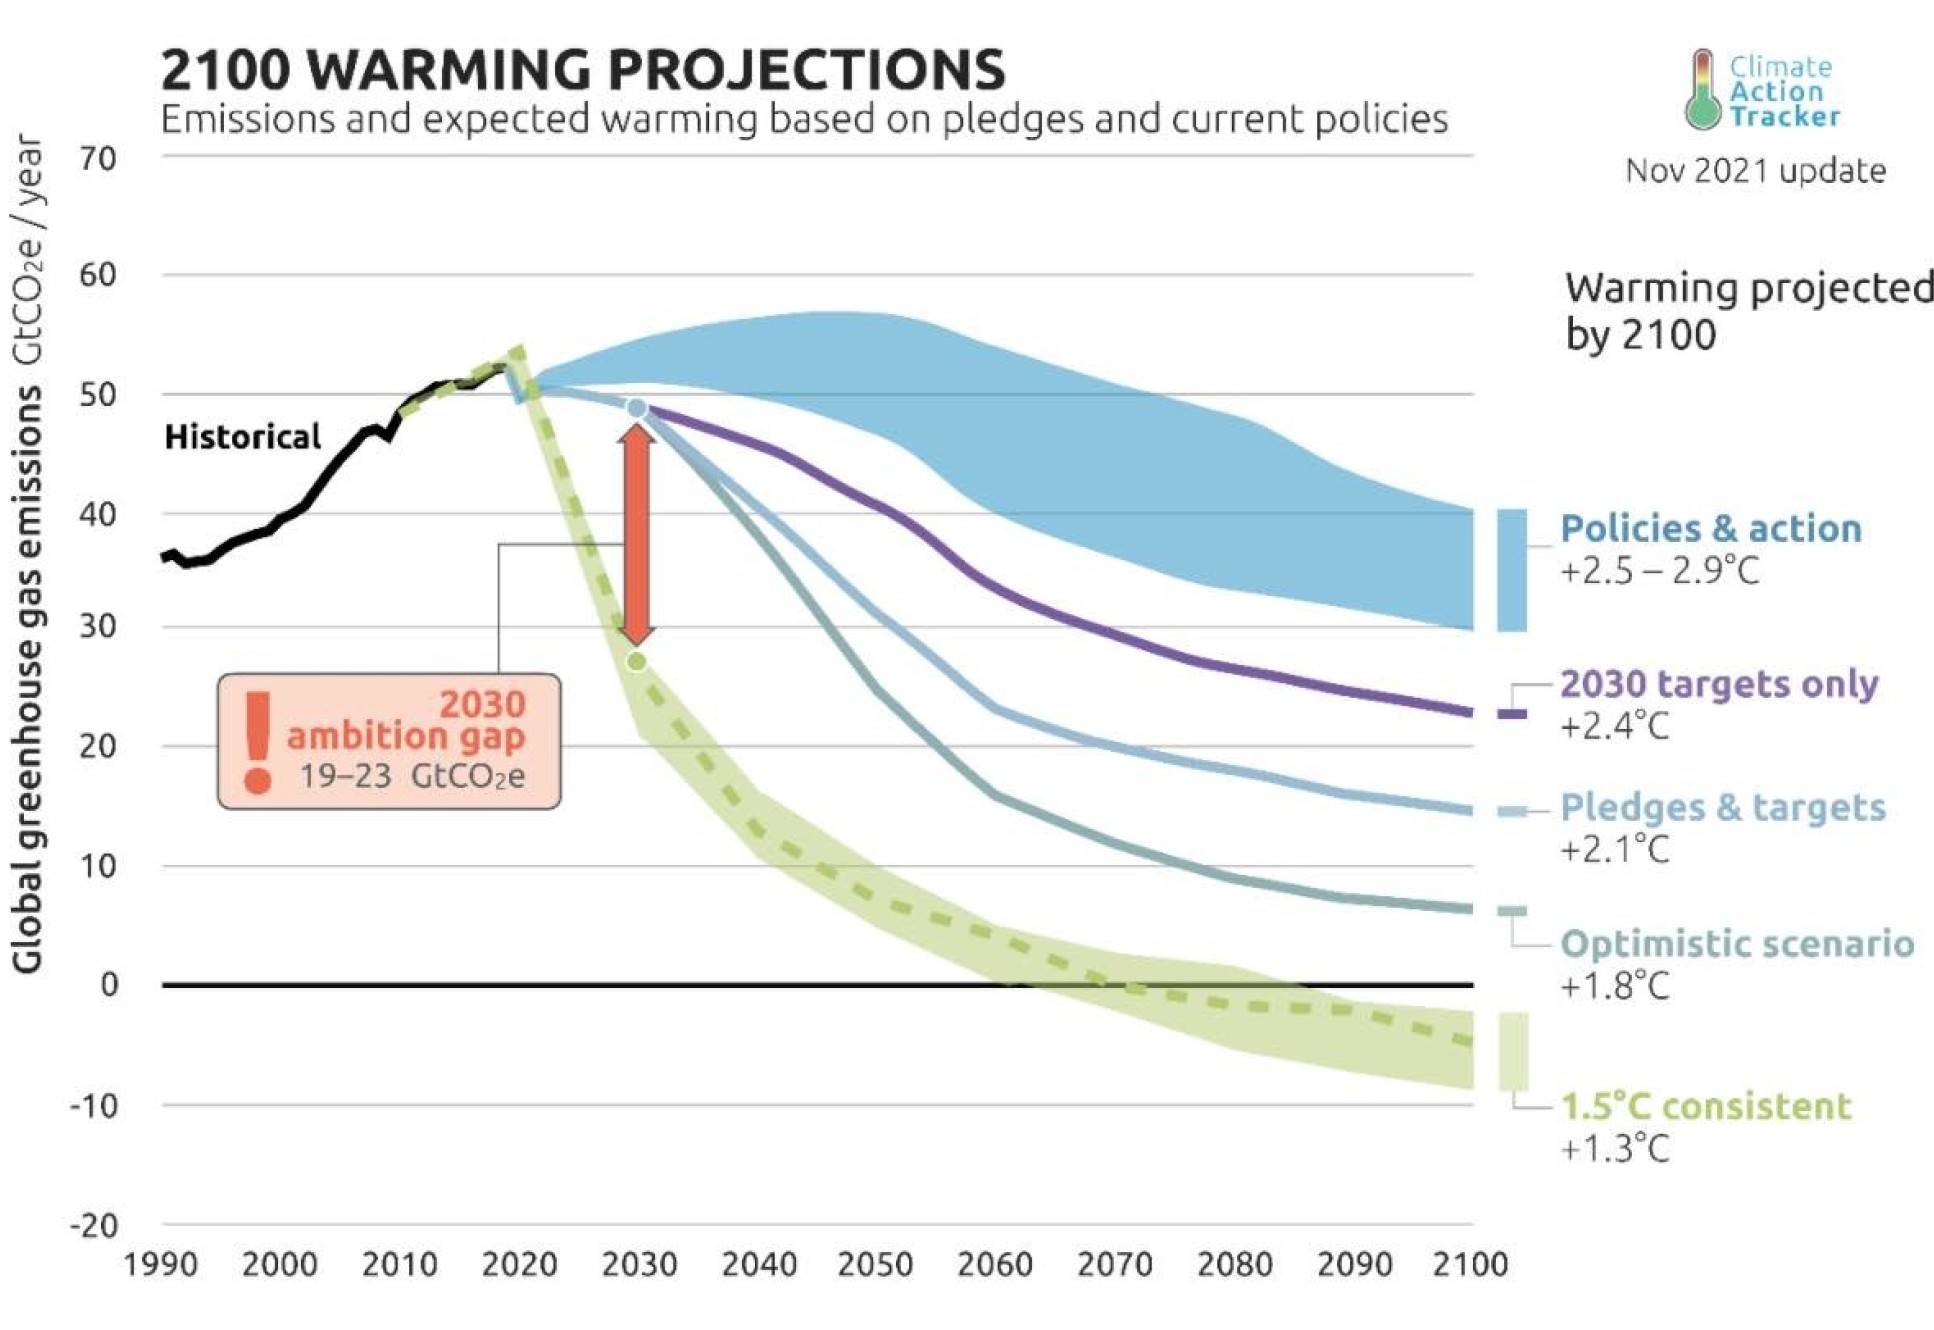 2100 warming projections graph showing emissions and expected warming based on pledges and current policies 